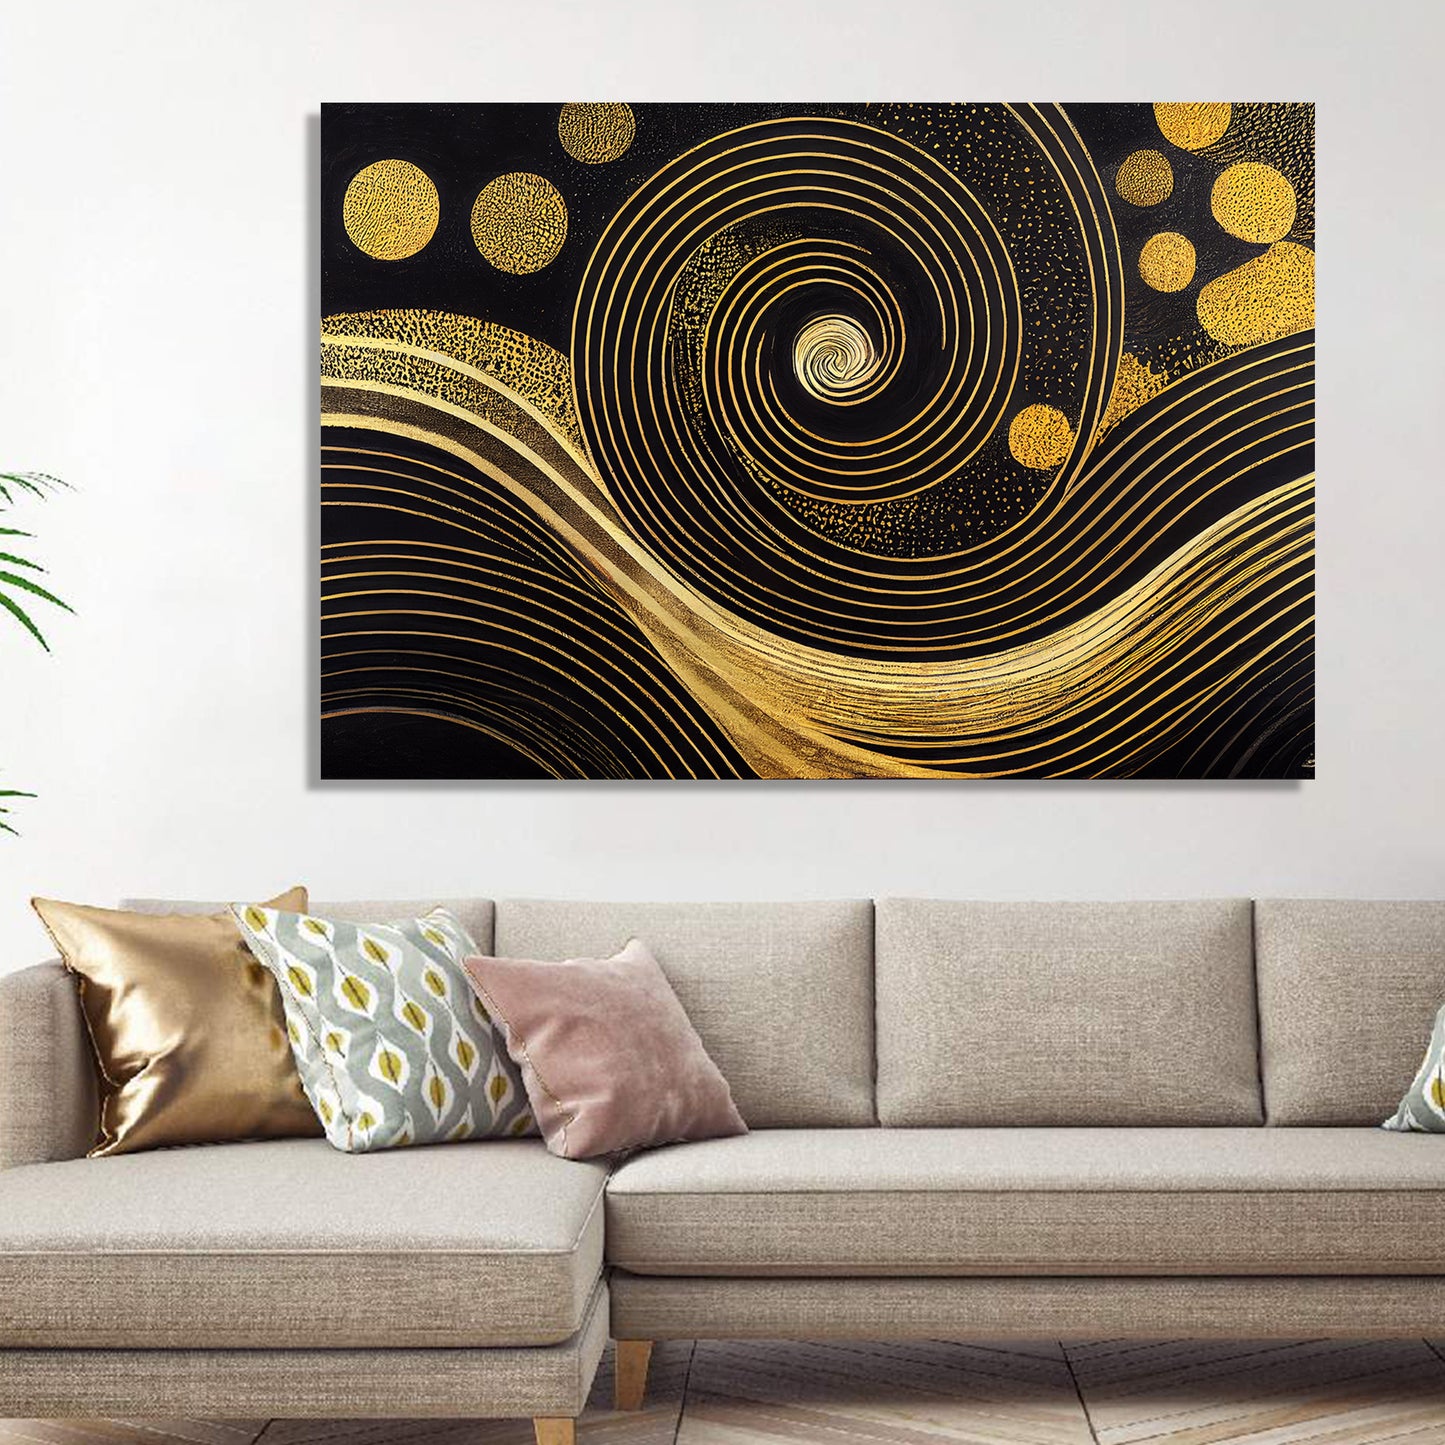 Abstract Golden Art Painting for Wall Decor - Modern Art Canvas Painting for Living Room Bedroom Decor